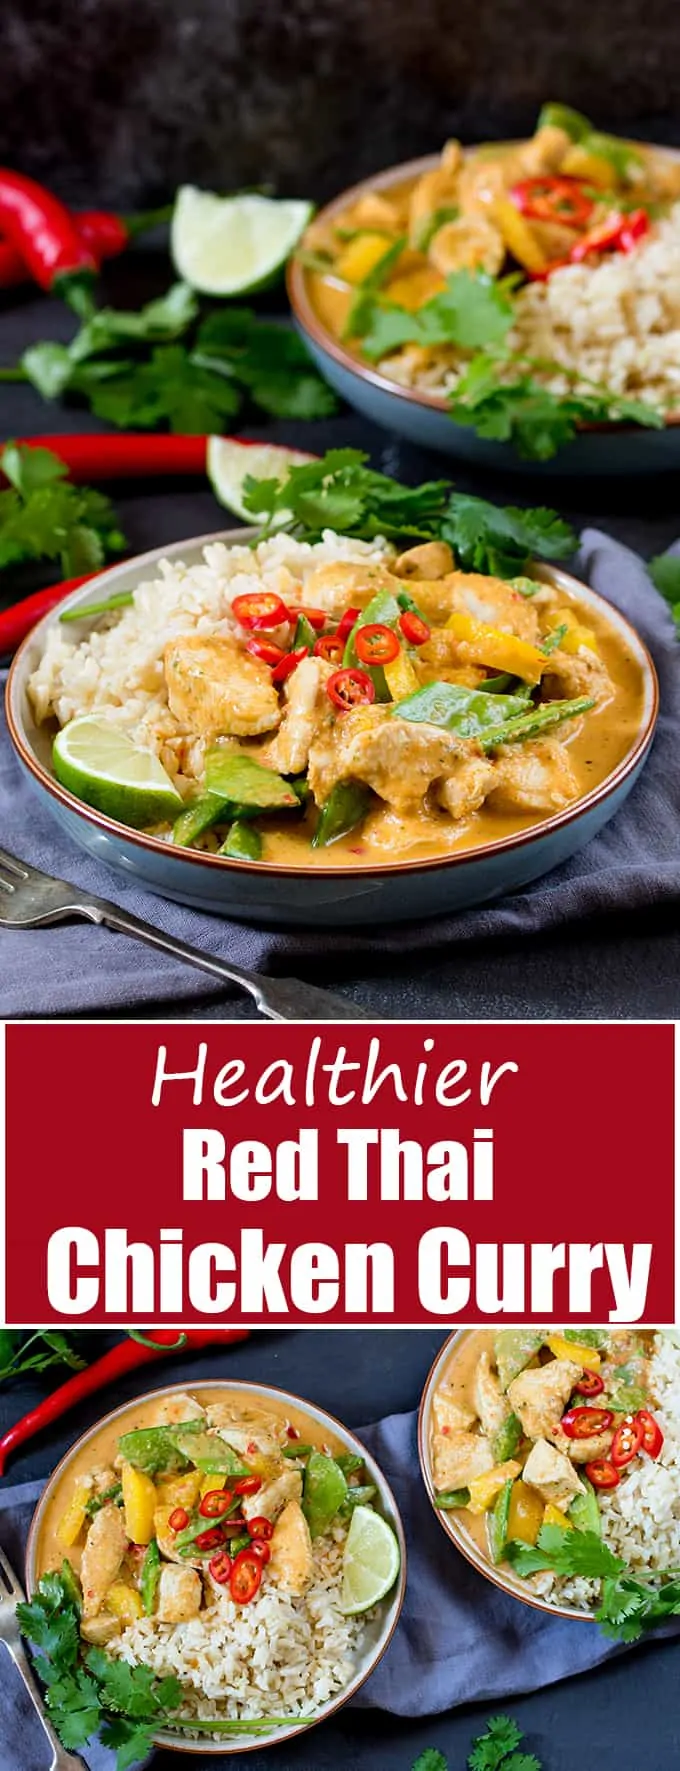 The homemade curry paste for this Spicy Healthier Red Thai Chicken Curry is easy and packed with flavour!